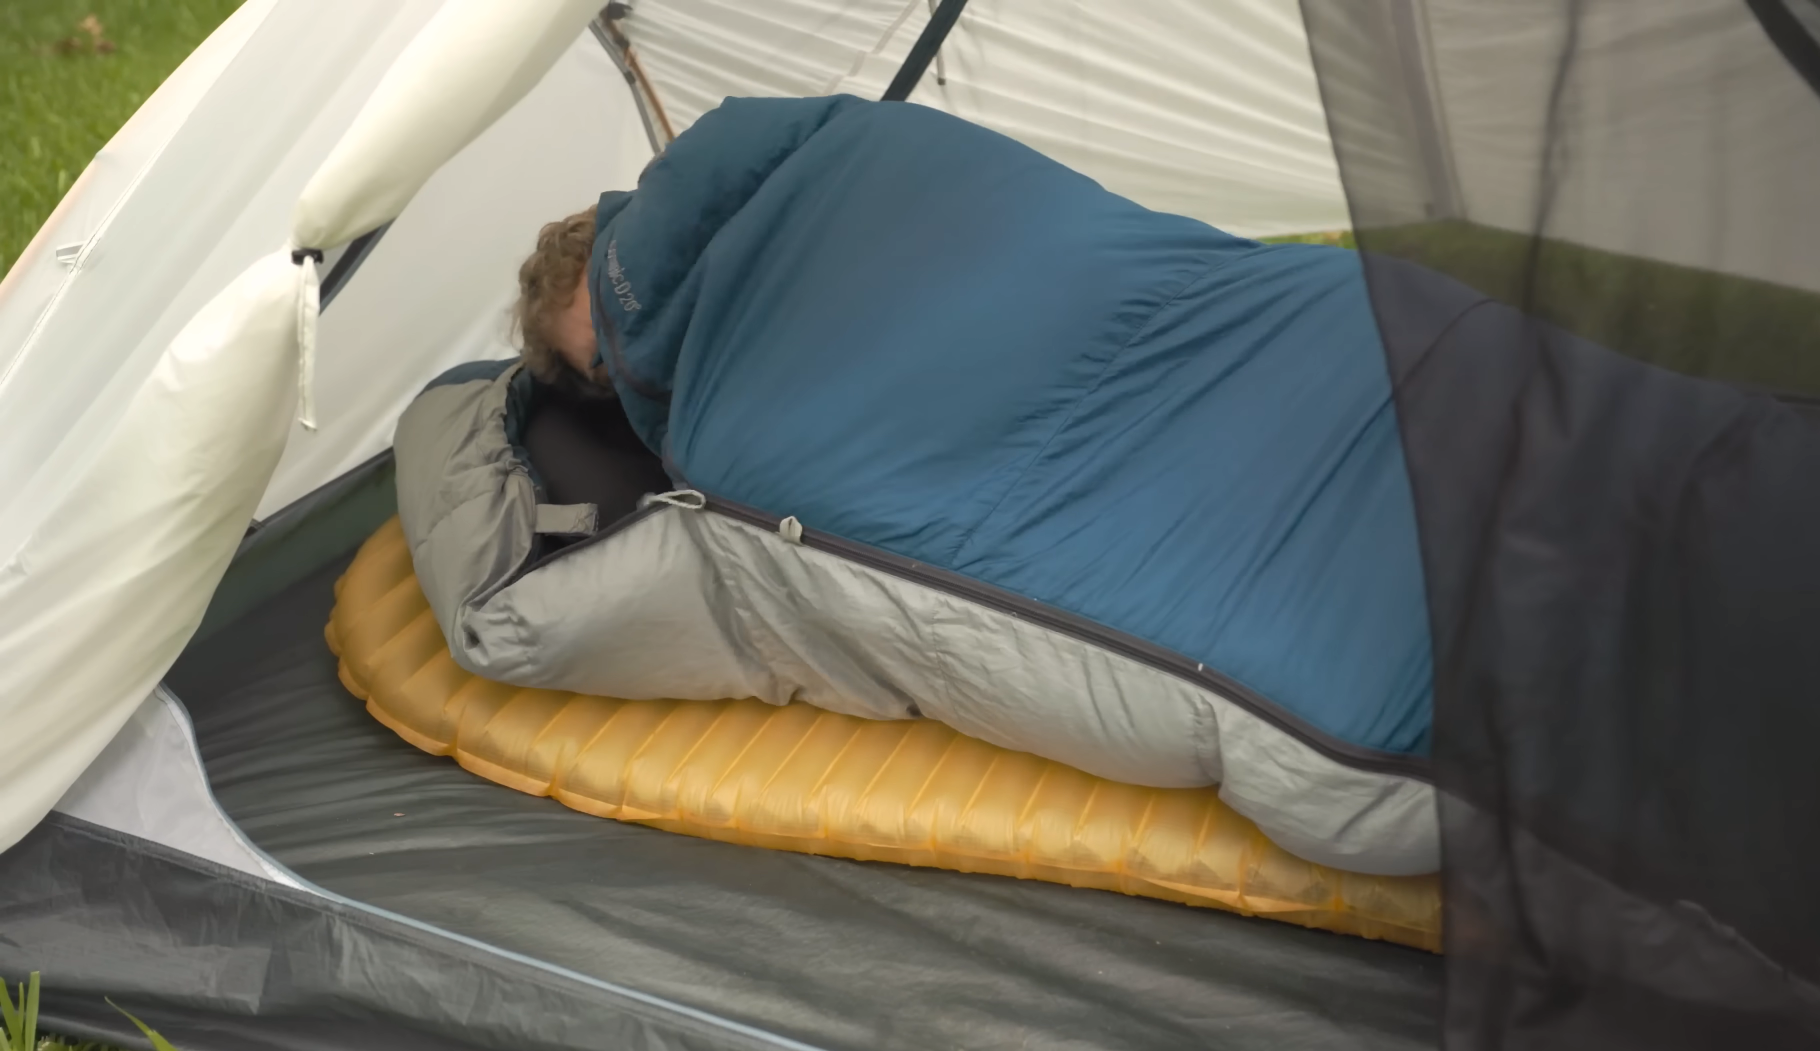 Why Put Something Under an Inflatable Sleeping Pad?